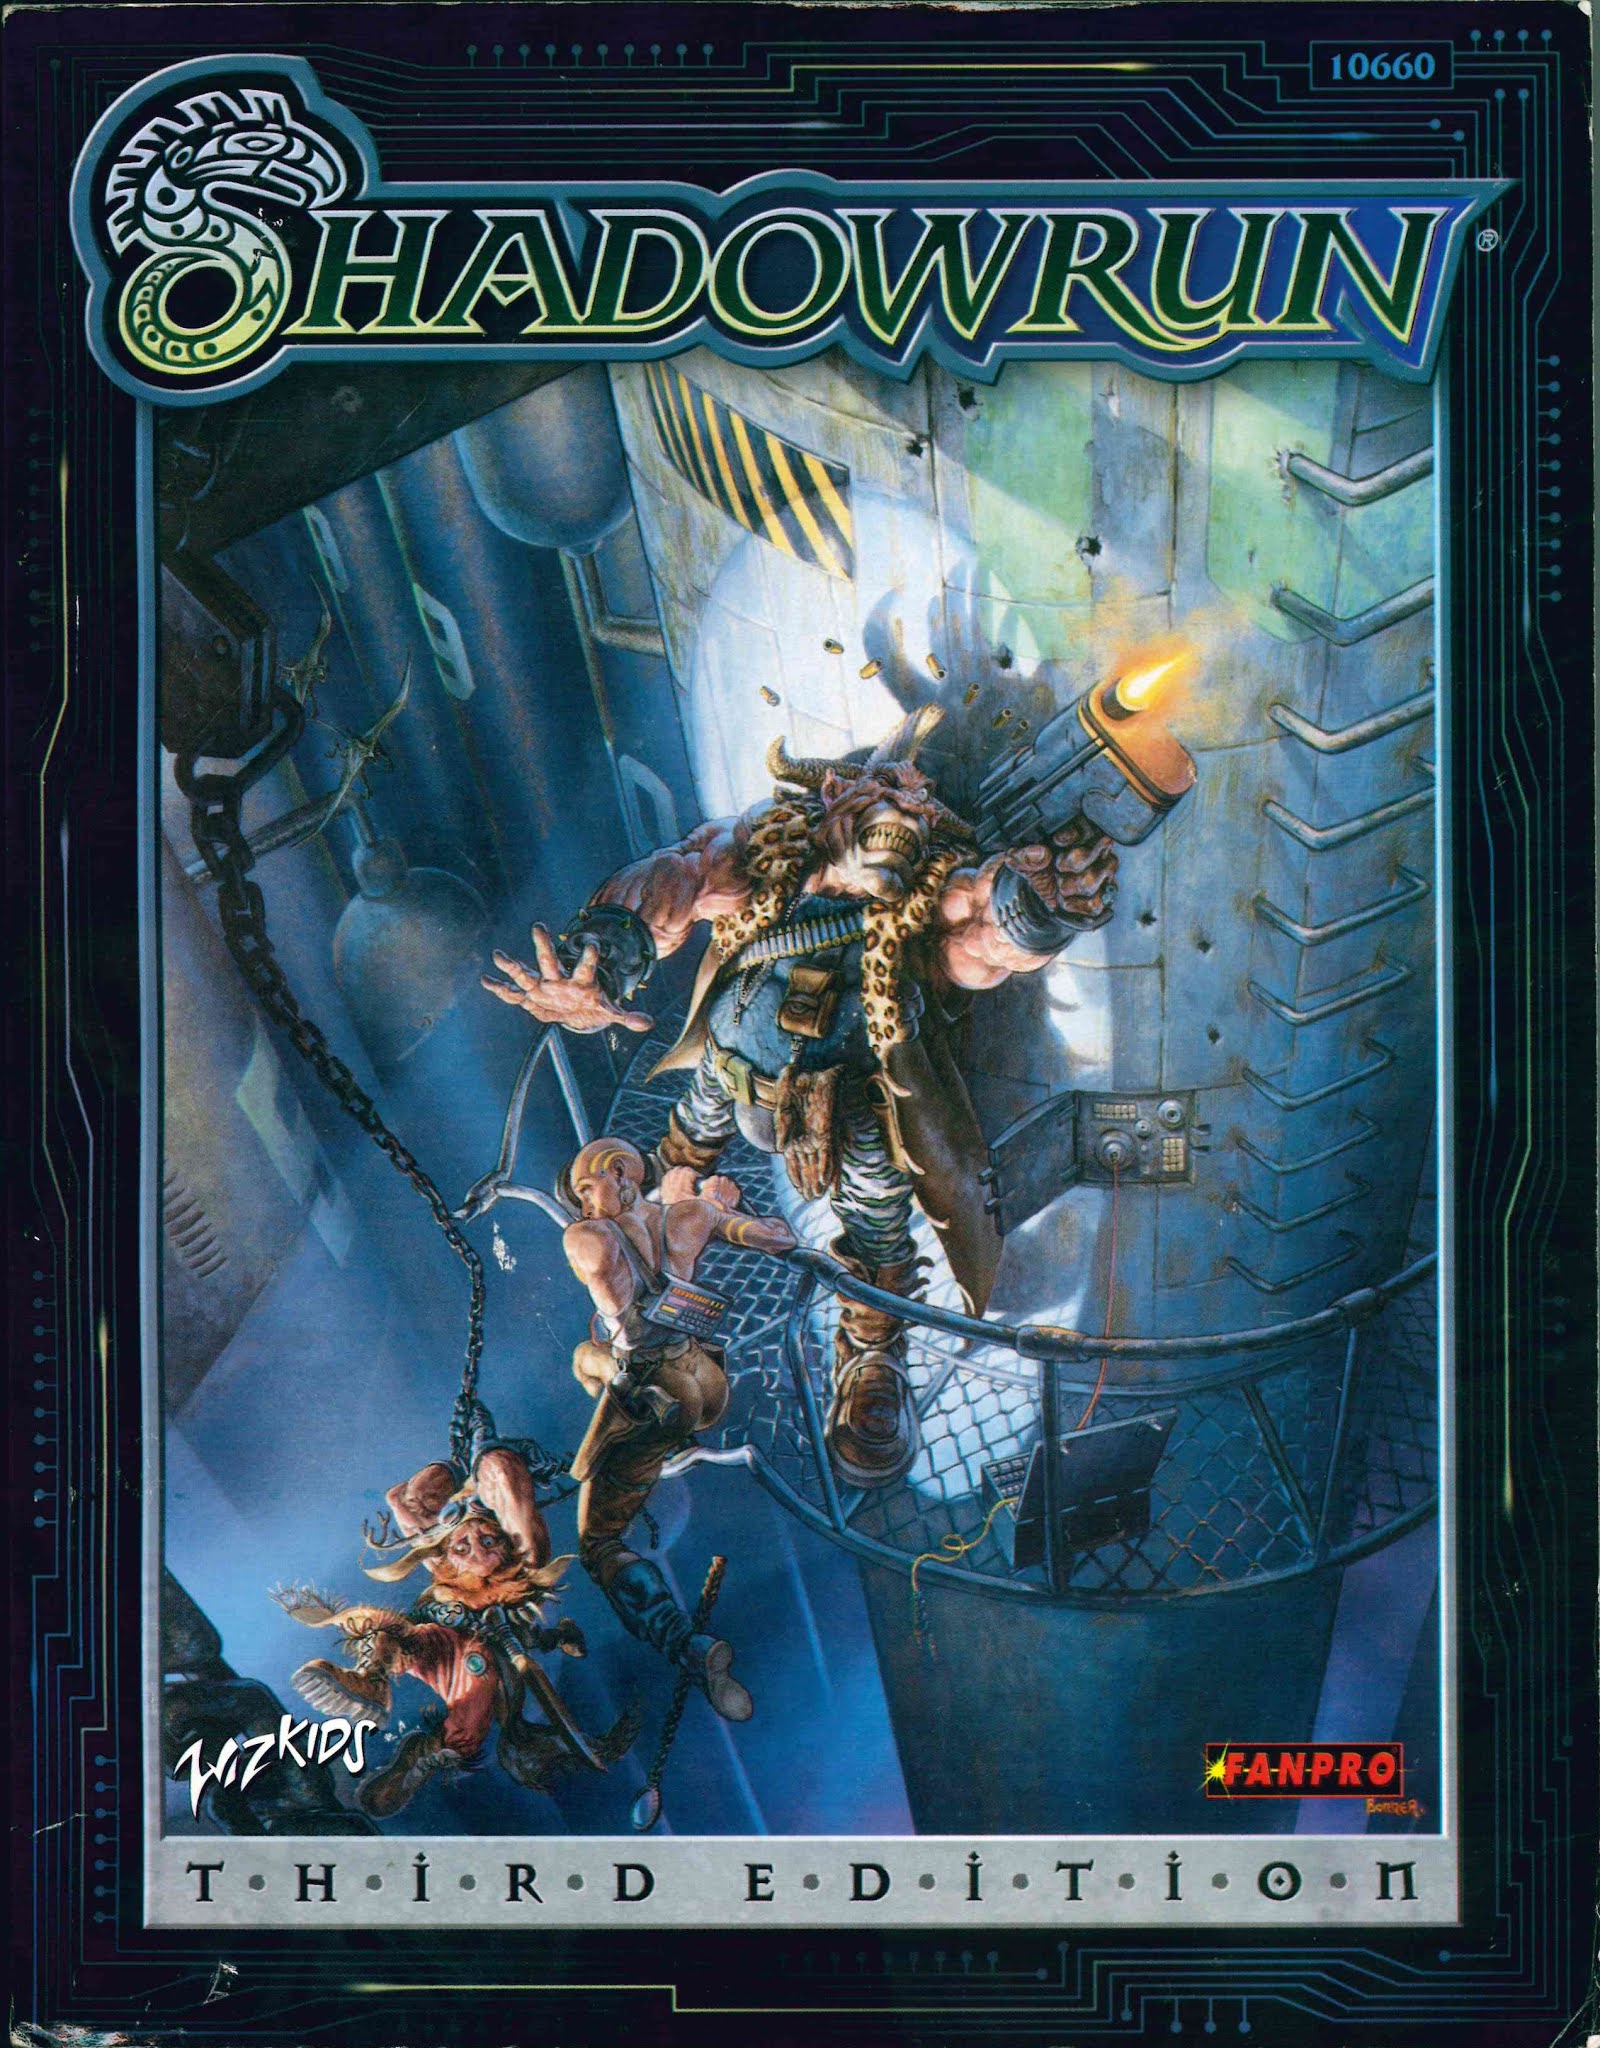 The ABC's of Shadowrunners (Part of the My First Shadowrun